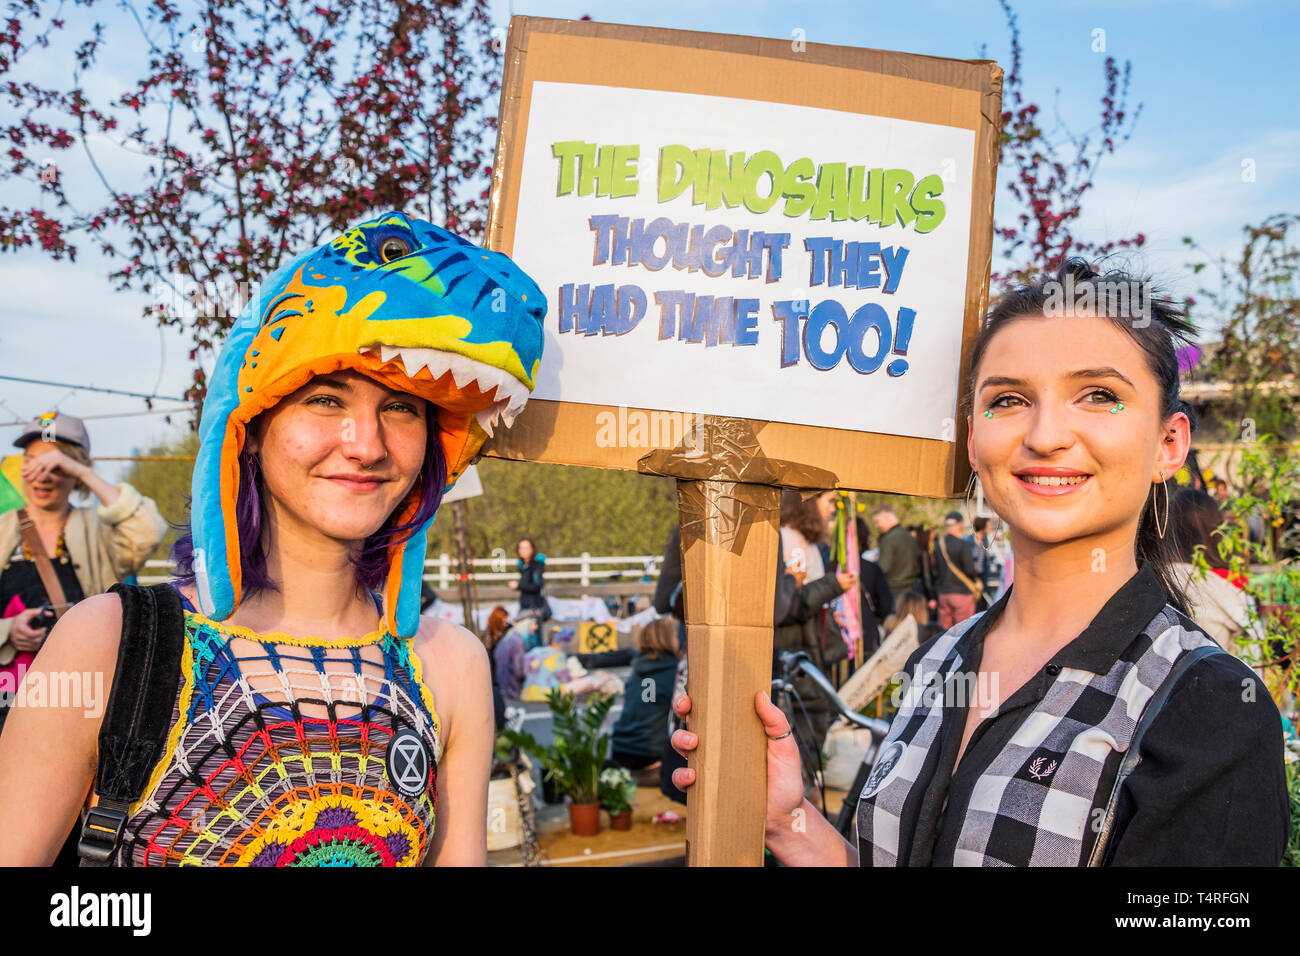 London, UK. 18th Apr 2019. The dinosaurs thought they had time too - Evening and the festival atmosphere returns - Day 4 - Protestors from Extinction Rebellion block several junctions in London as part of their ongoing protest to demand action by the UK Government on the 'climate chrisis'. The action is part of an international co-ordinated protest. Credit: Guy Bell/Alamy Live News Stock Photo